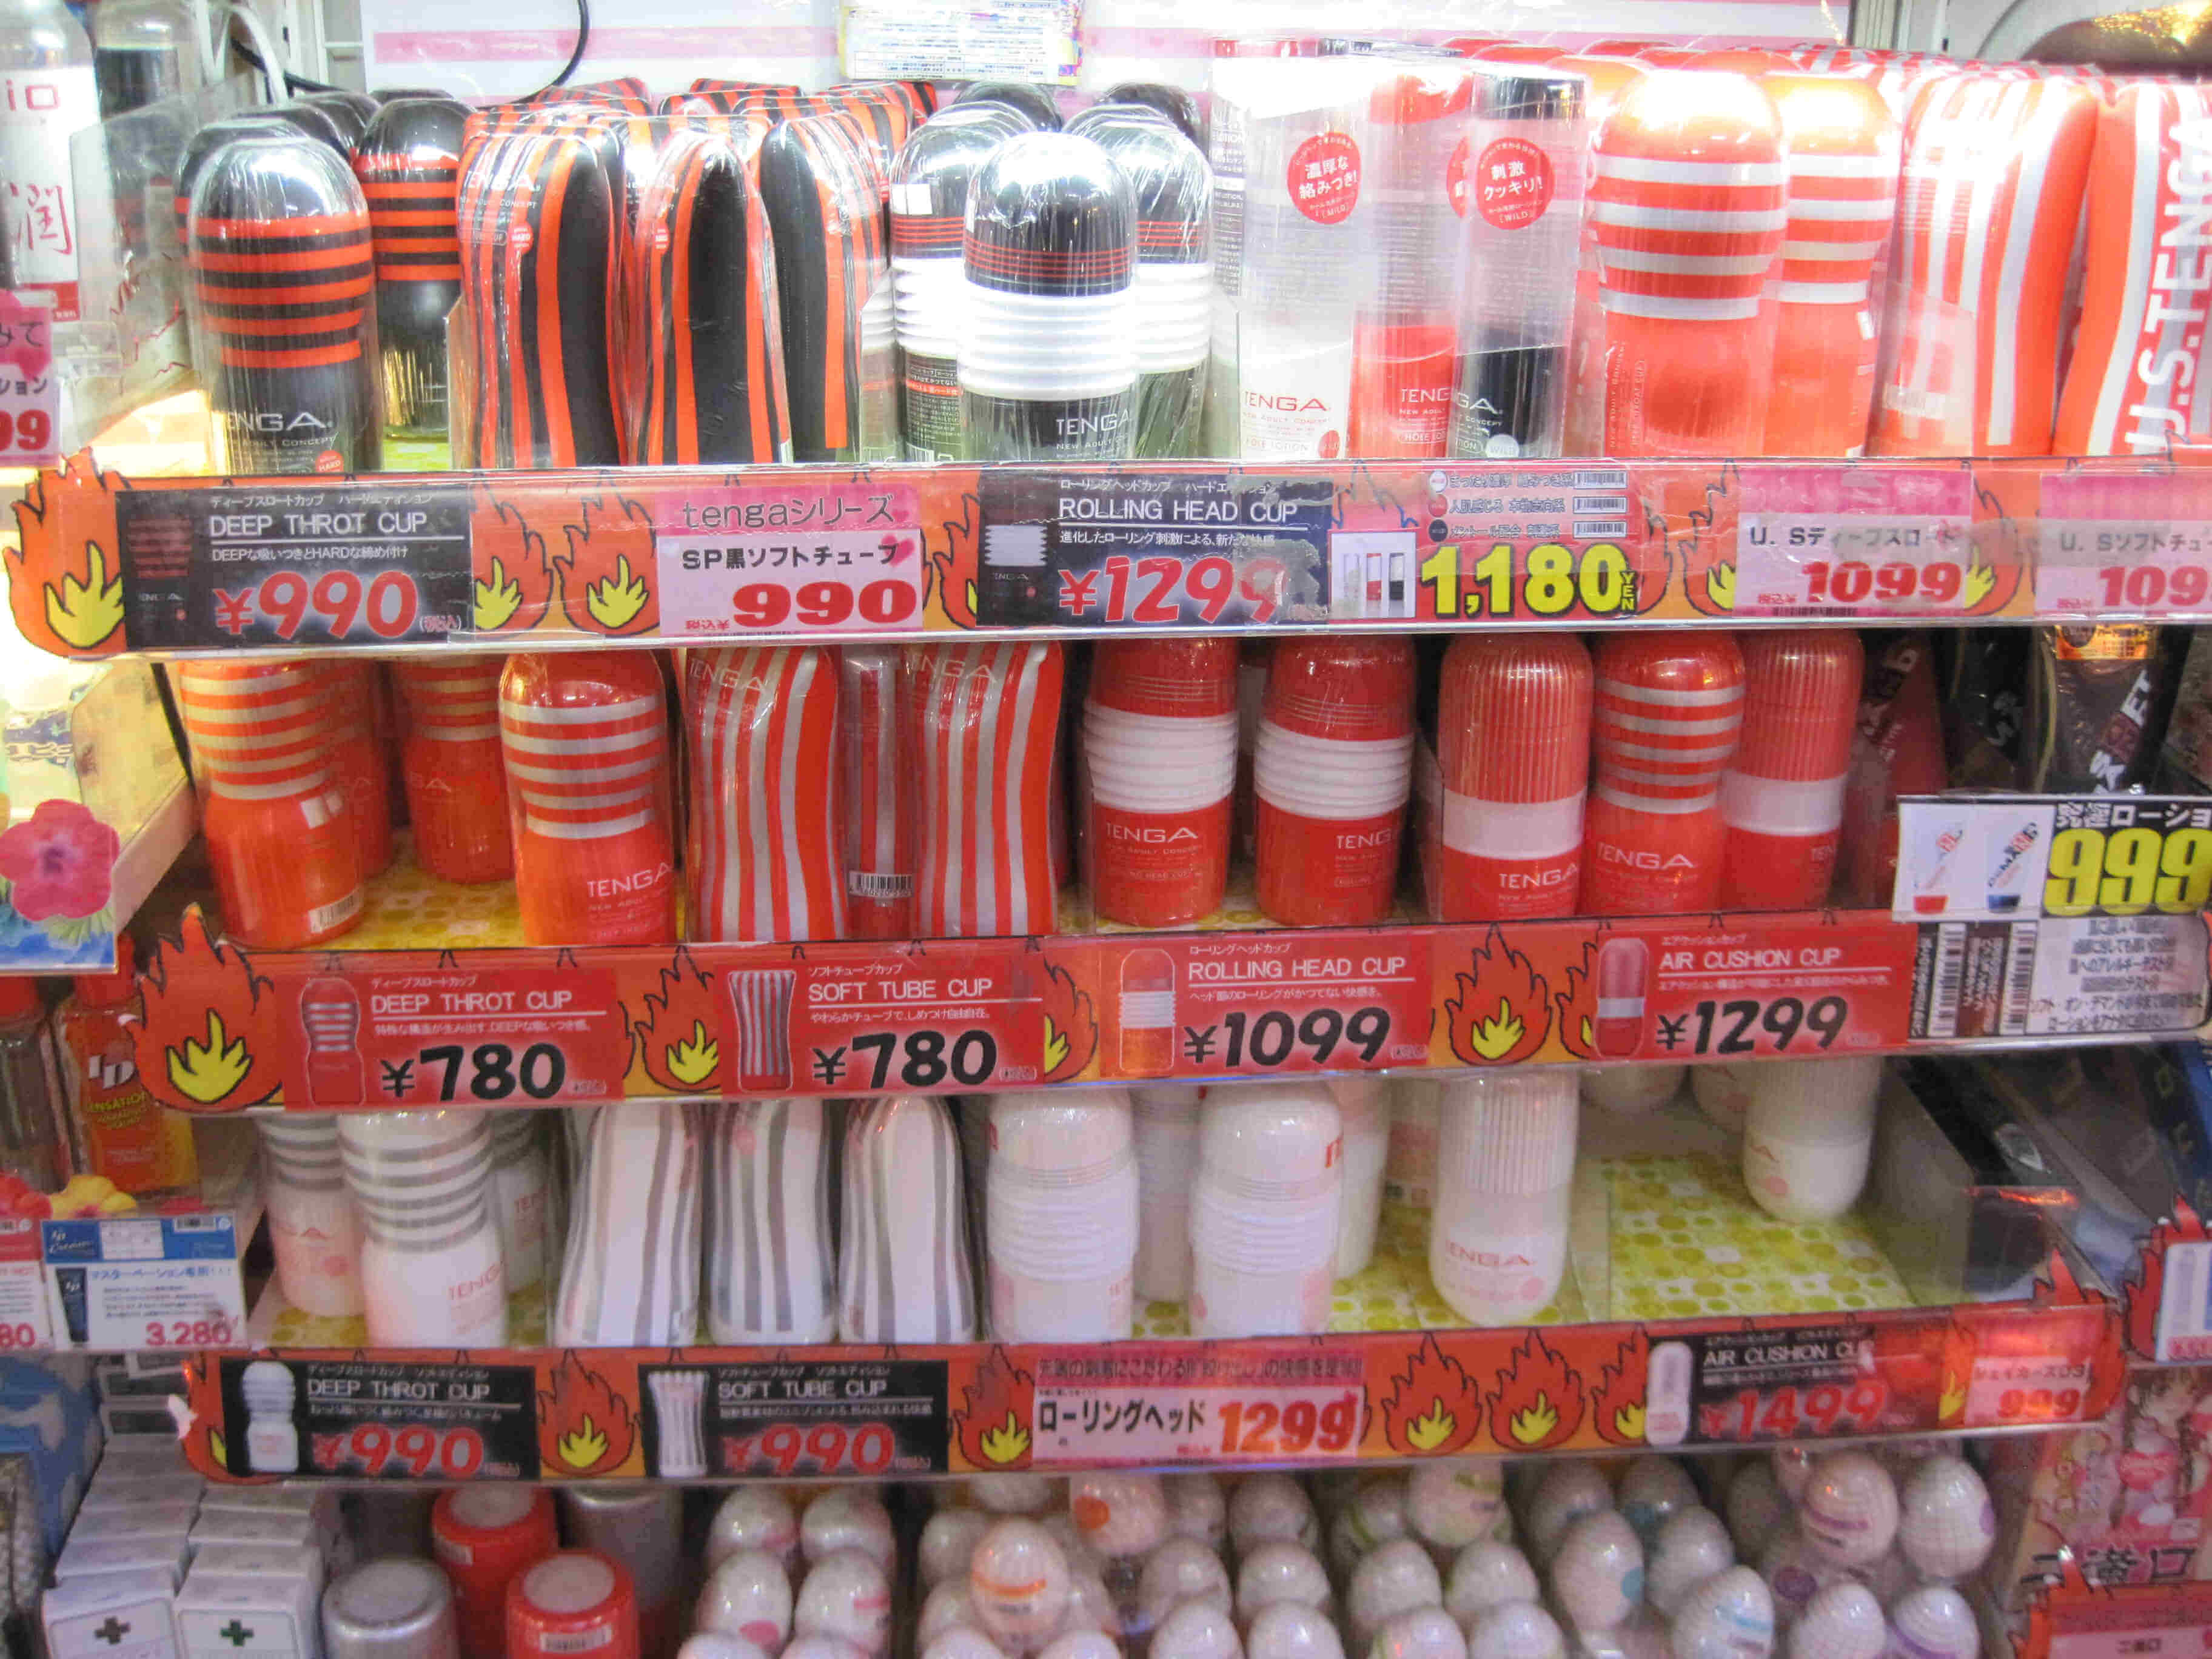 Front view of product shelves, in a Japanese store, with various items on them